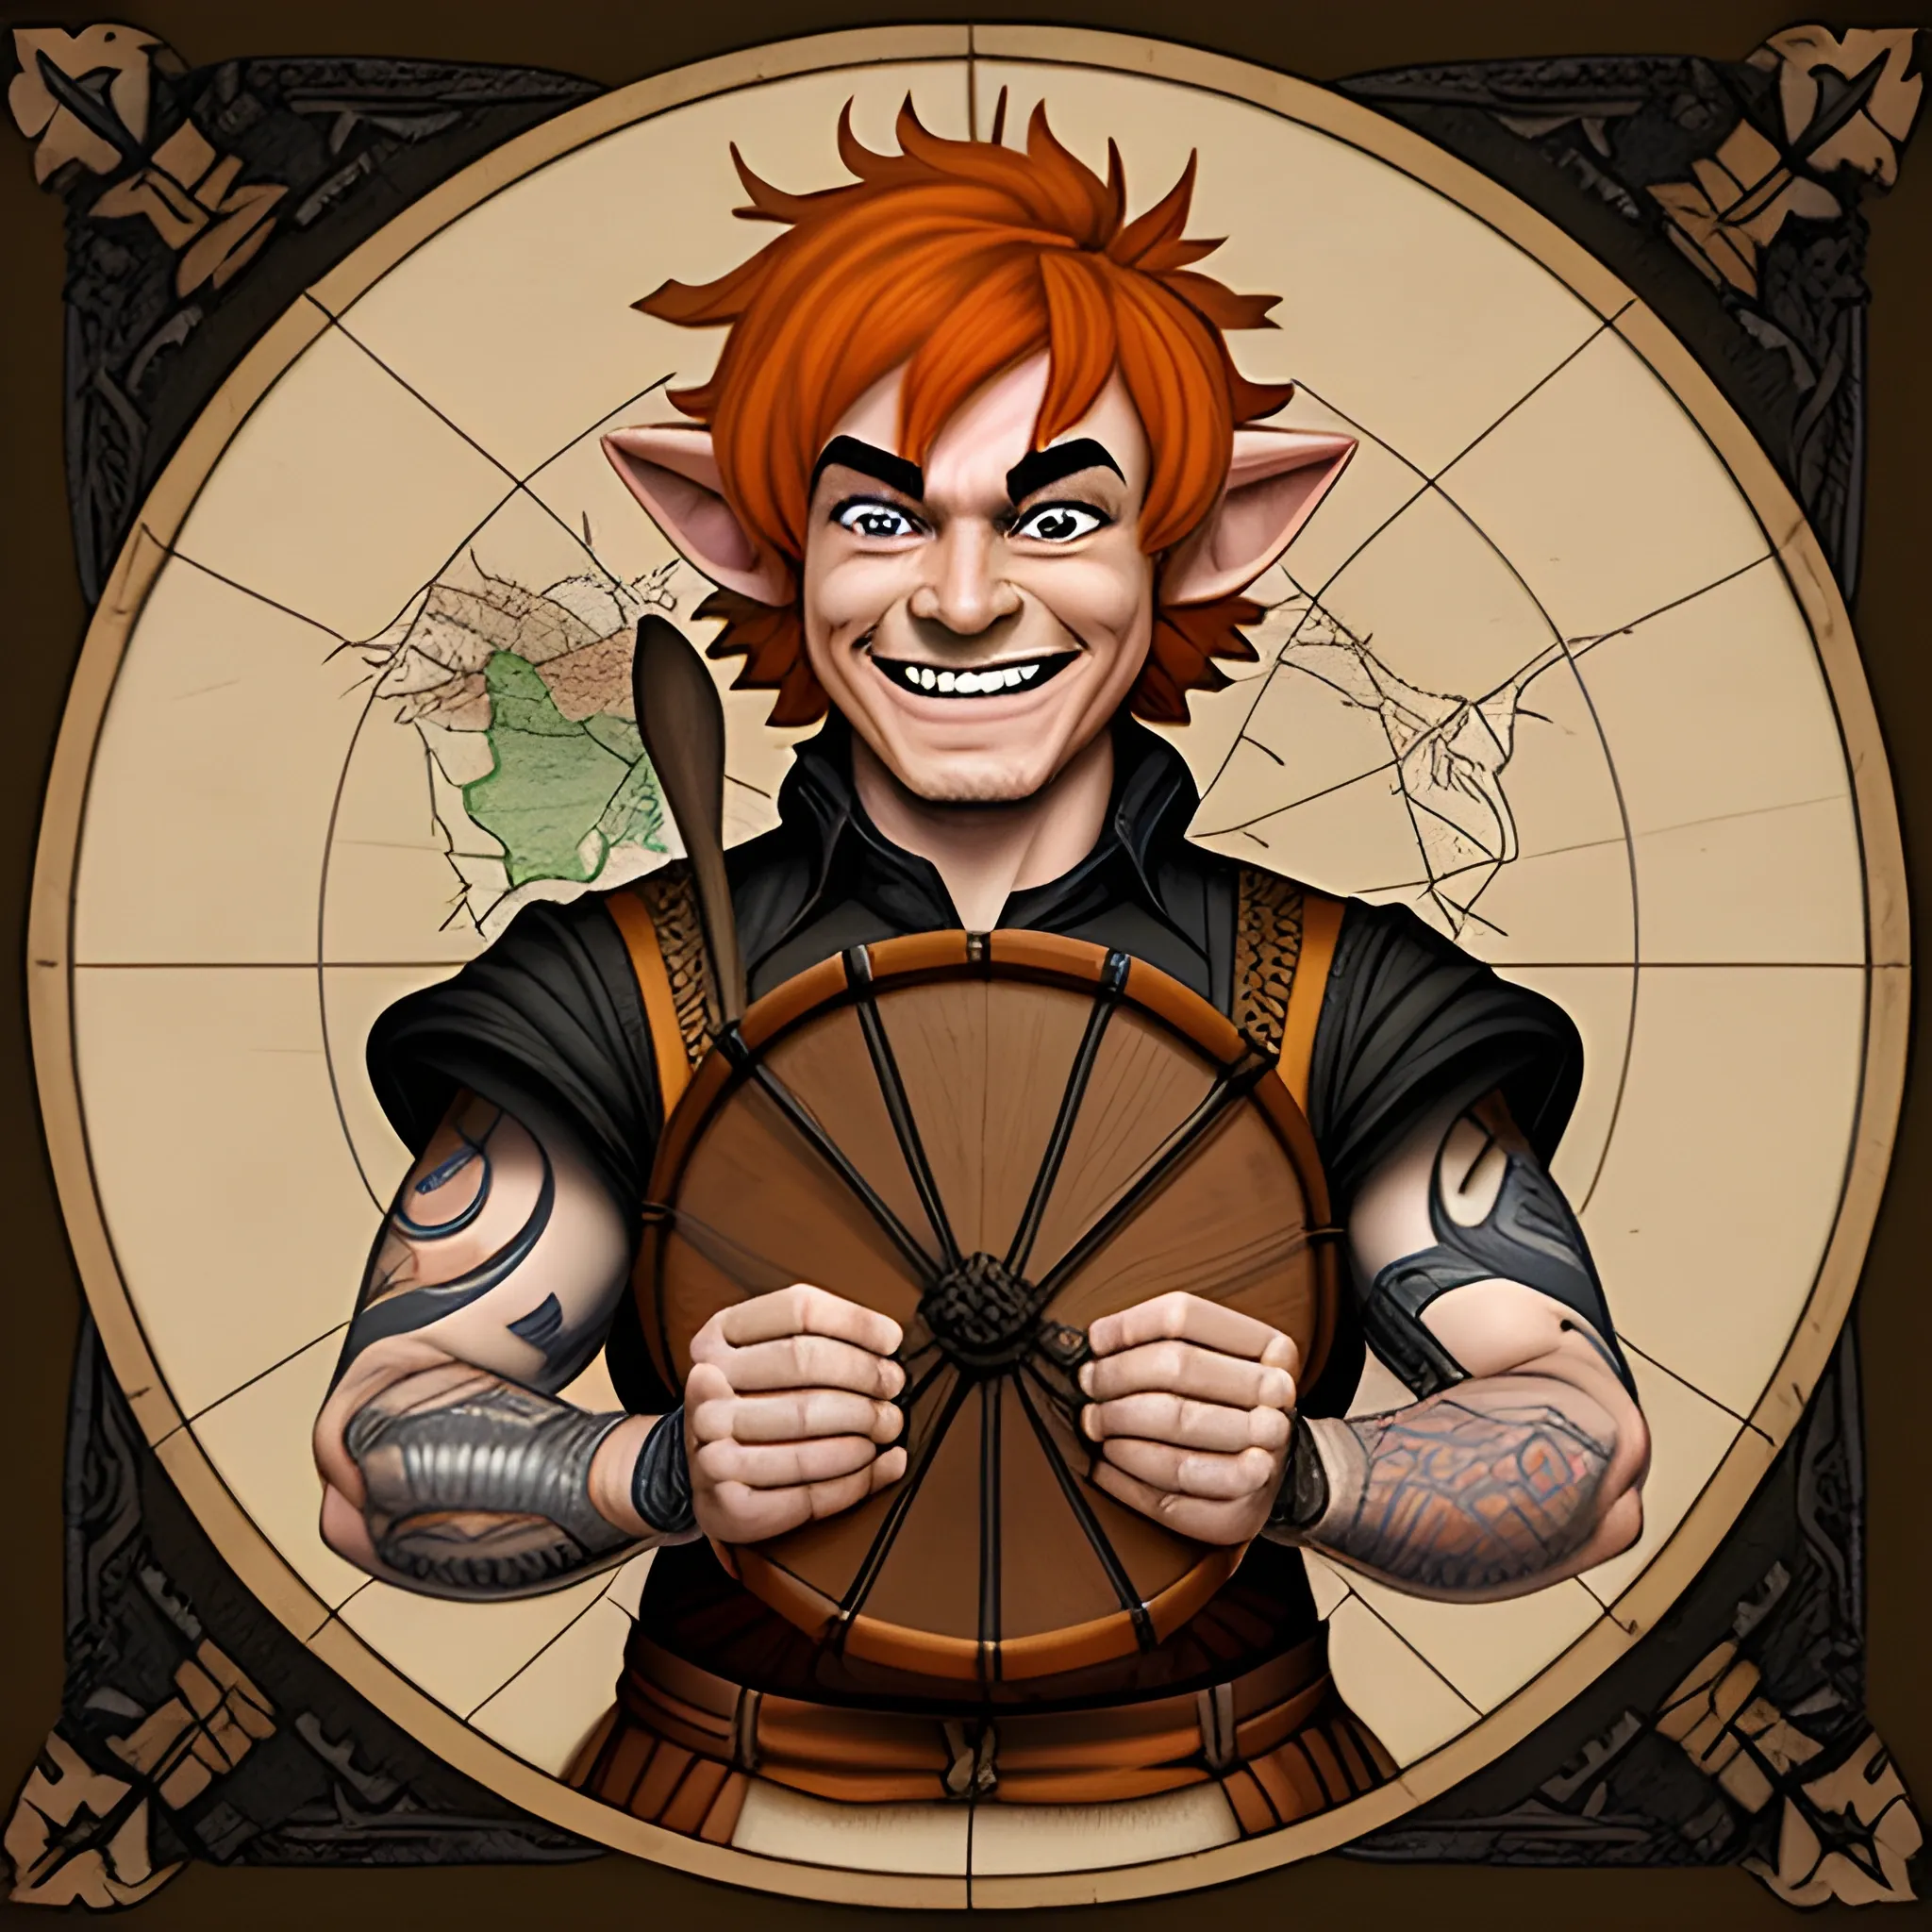 DnD  weak young baby face halfling male short haired halfling dark orange ginger with a map tattoo smiling with a mugshot expression and playing a small drum 